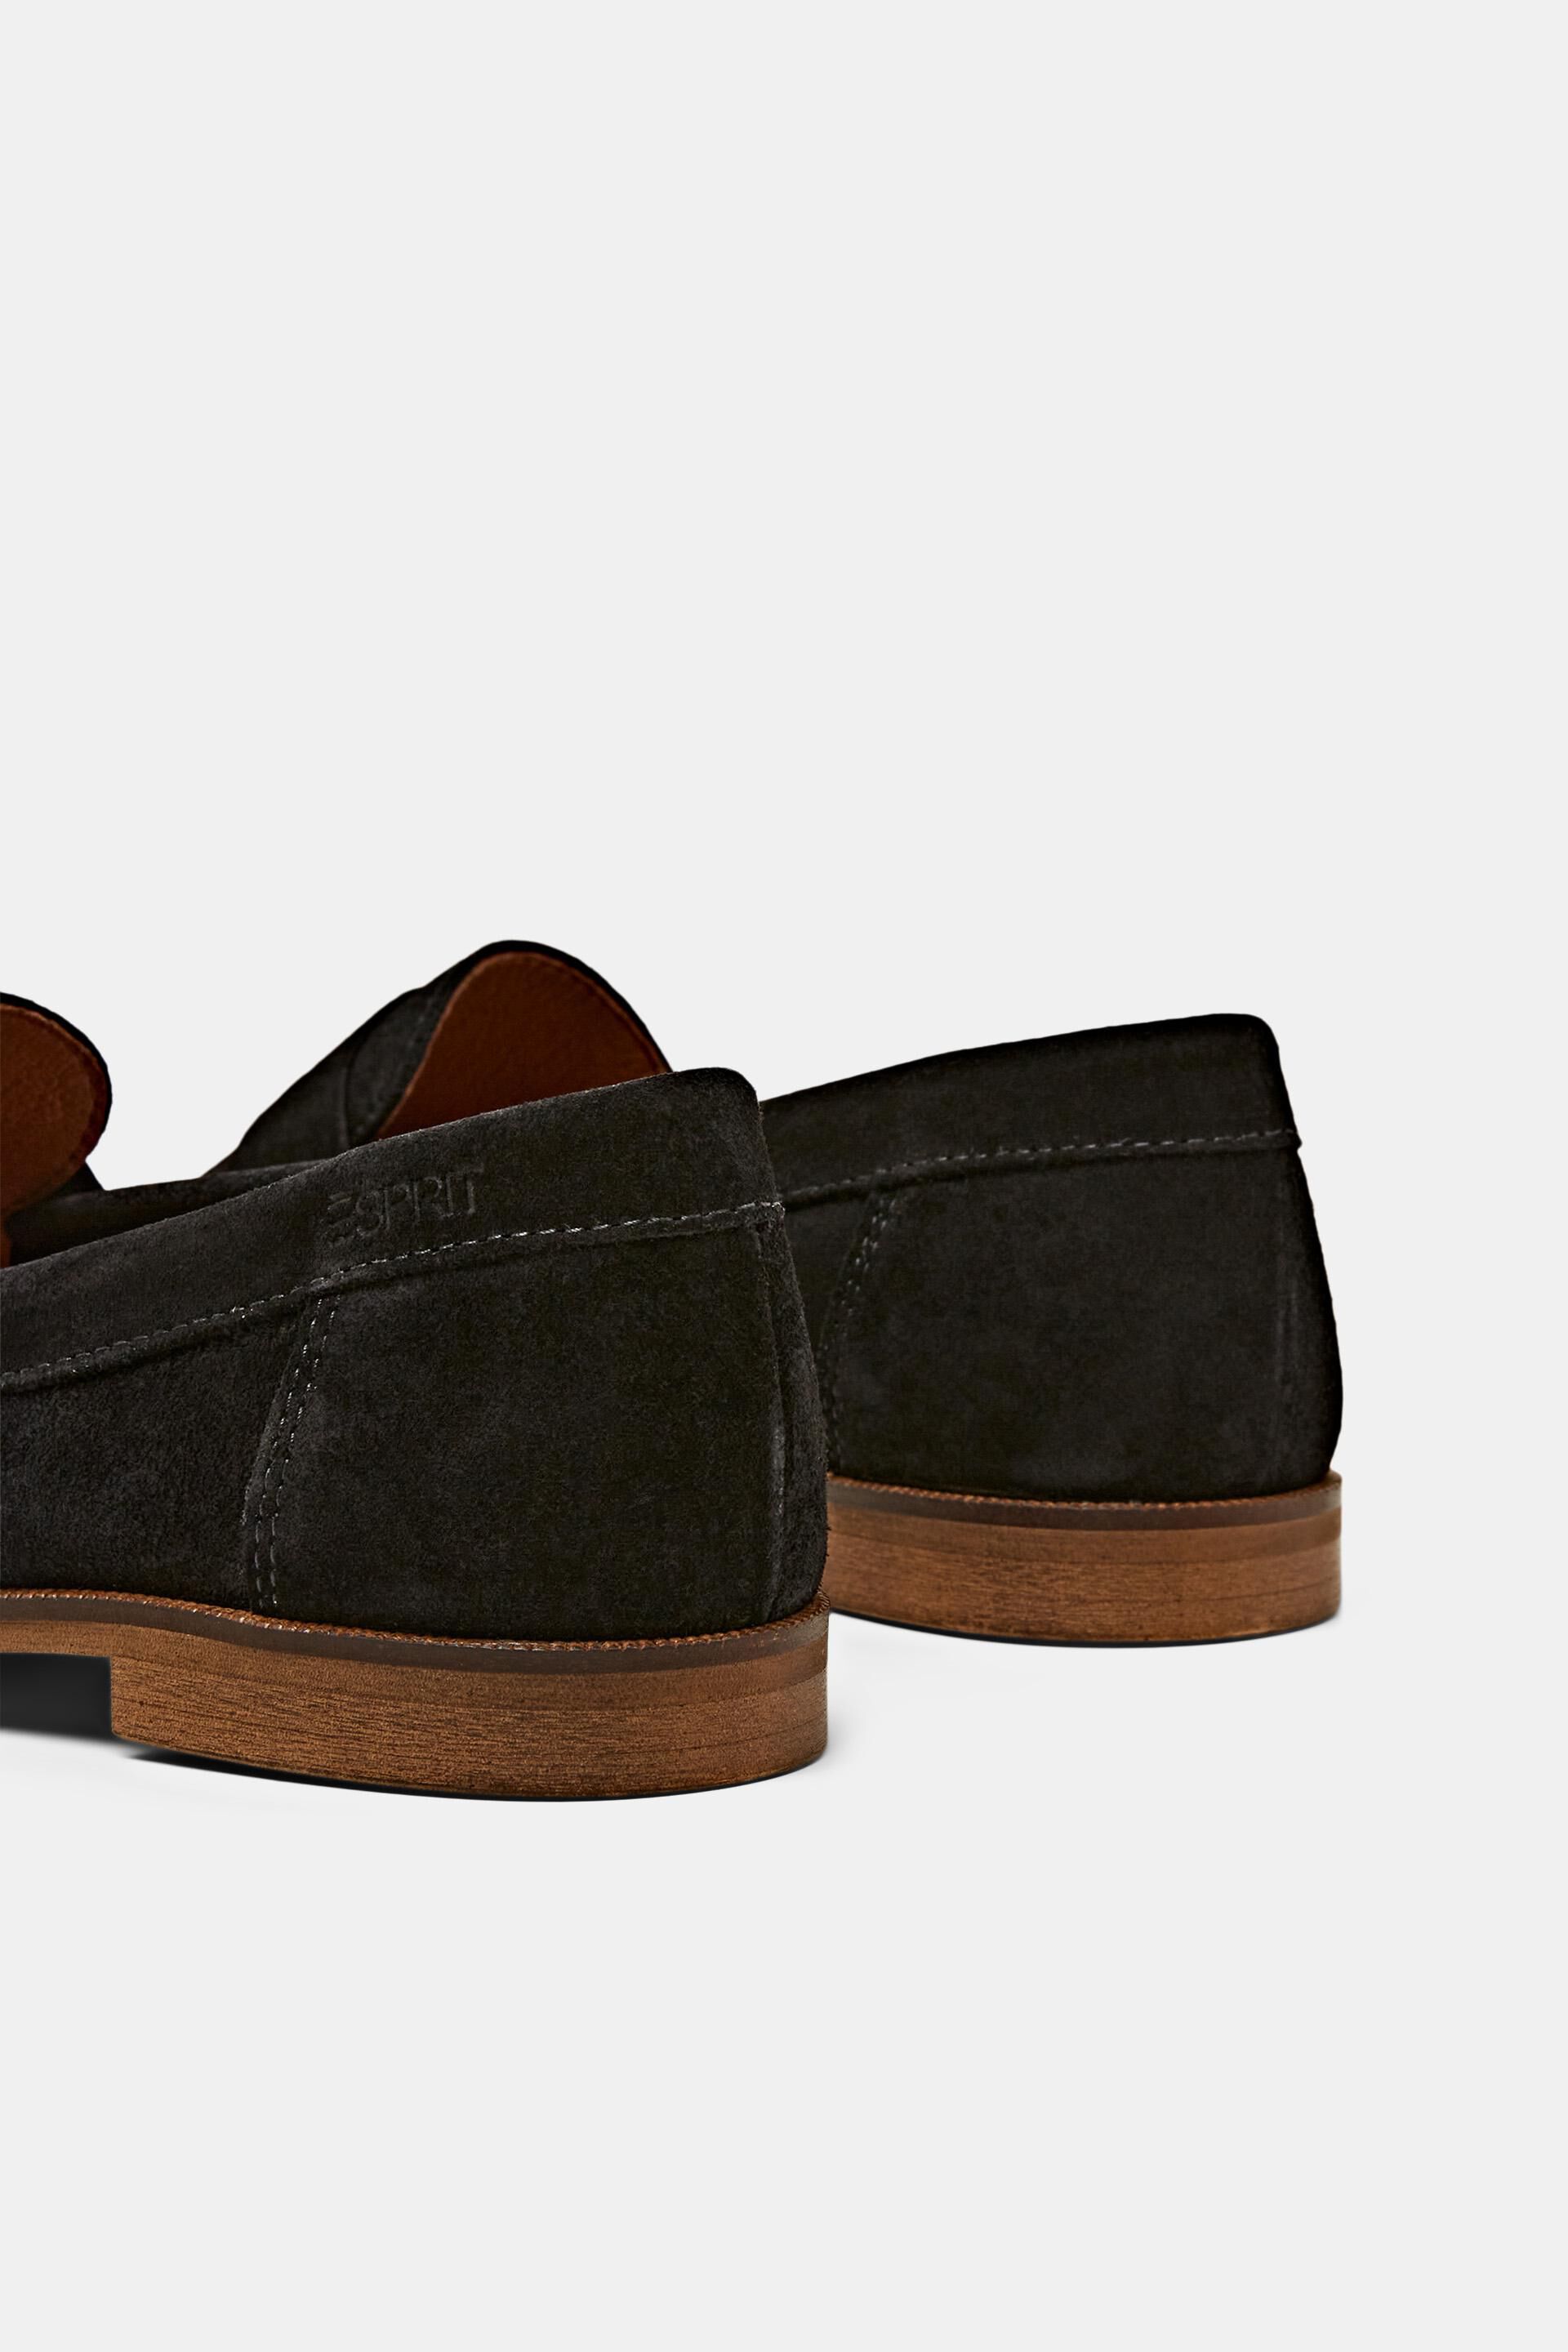 ESPRIT - Suede Leather Loafer at our online shop